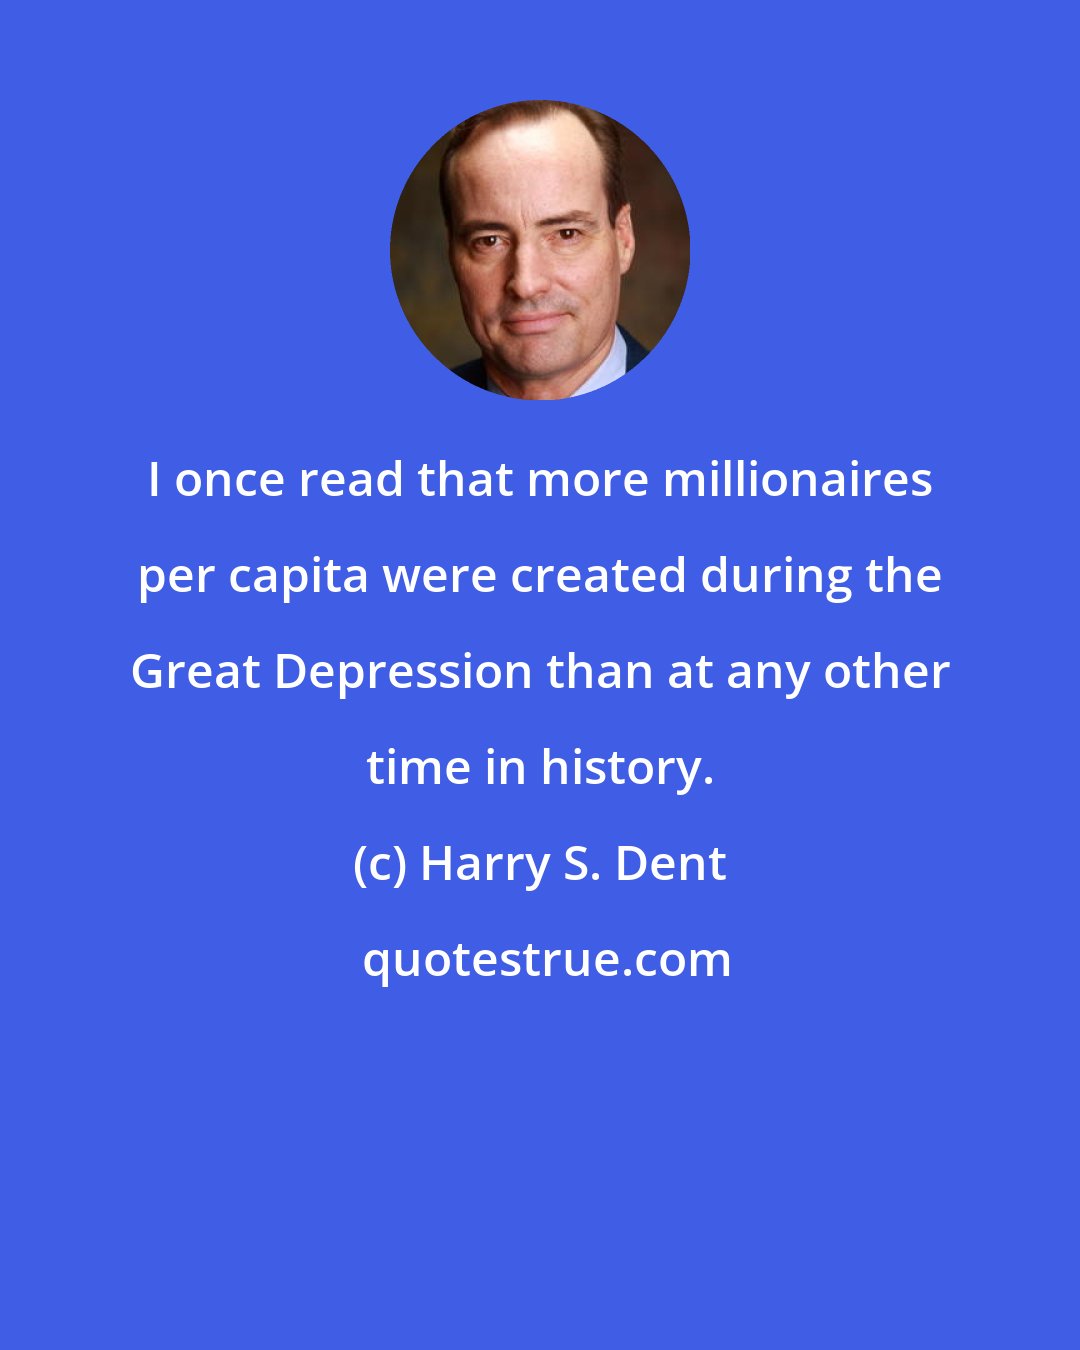 Harry S. Dent: I once read that more millionaires per capita were created during the Great Depression than at any other time in history.